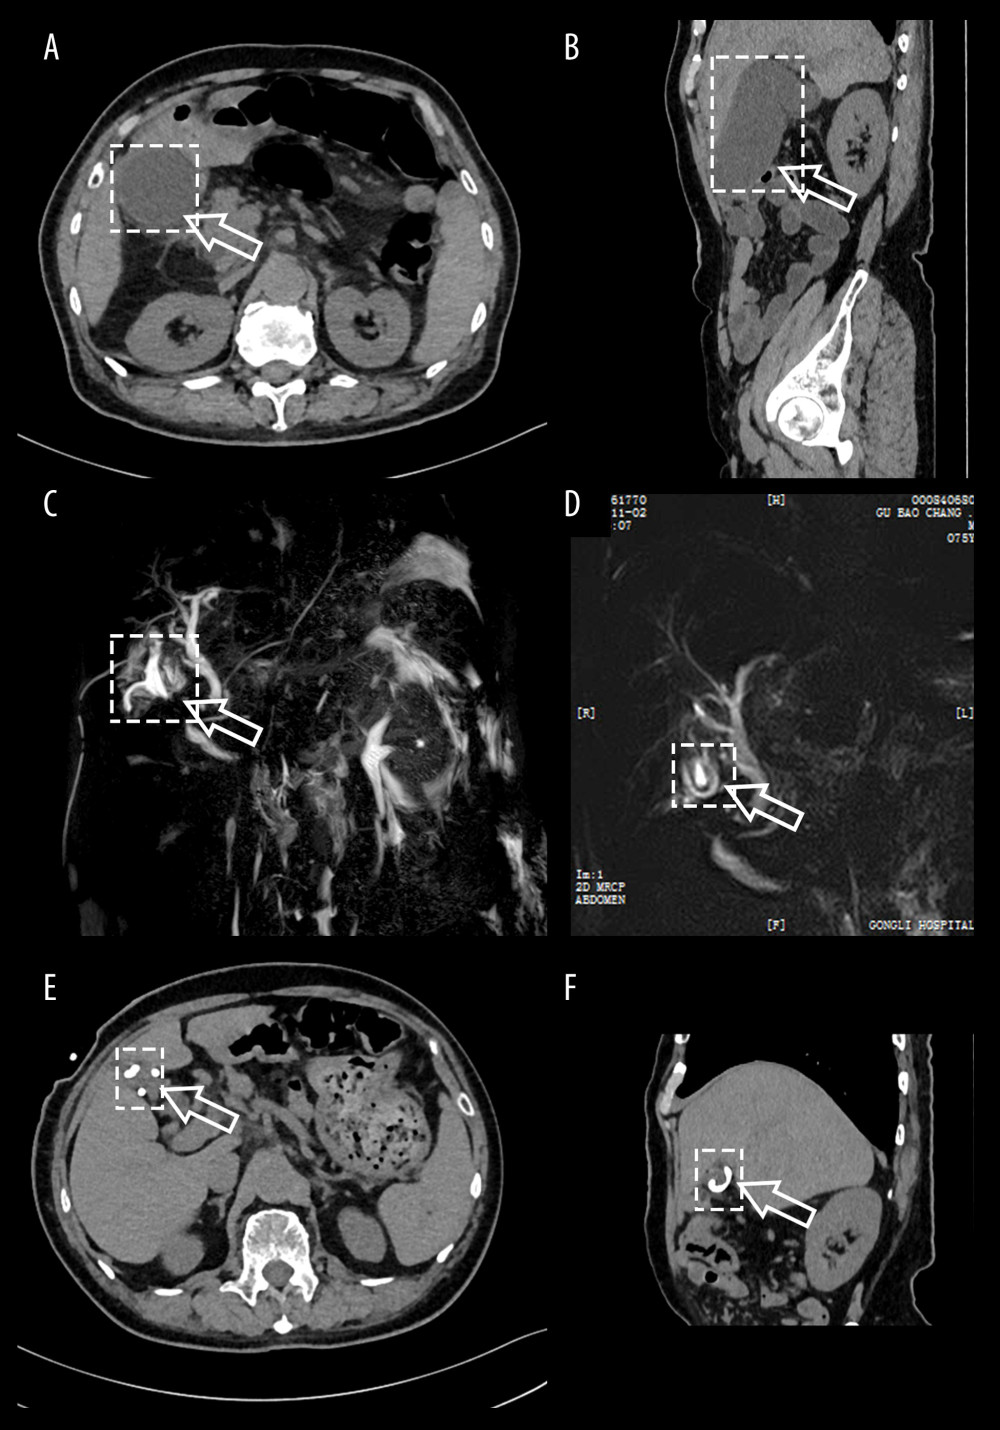 Computed tomography and magnetic resonance images in the treatment course. CT images at the initial diagnosis (A, B), MRI images of the patient who received treatment (C, D), and CT images of the patient at follow-up examination (E, F). White boxes and arrows indicate the size and location of the lesion.